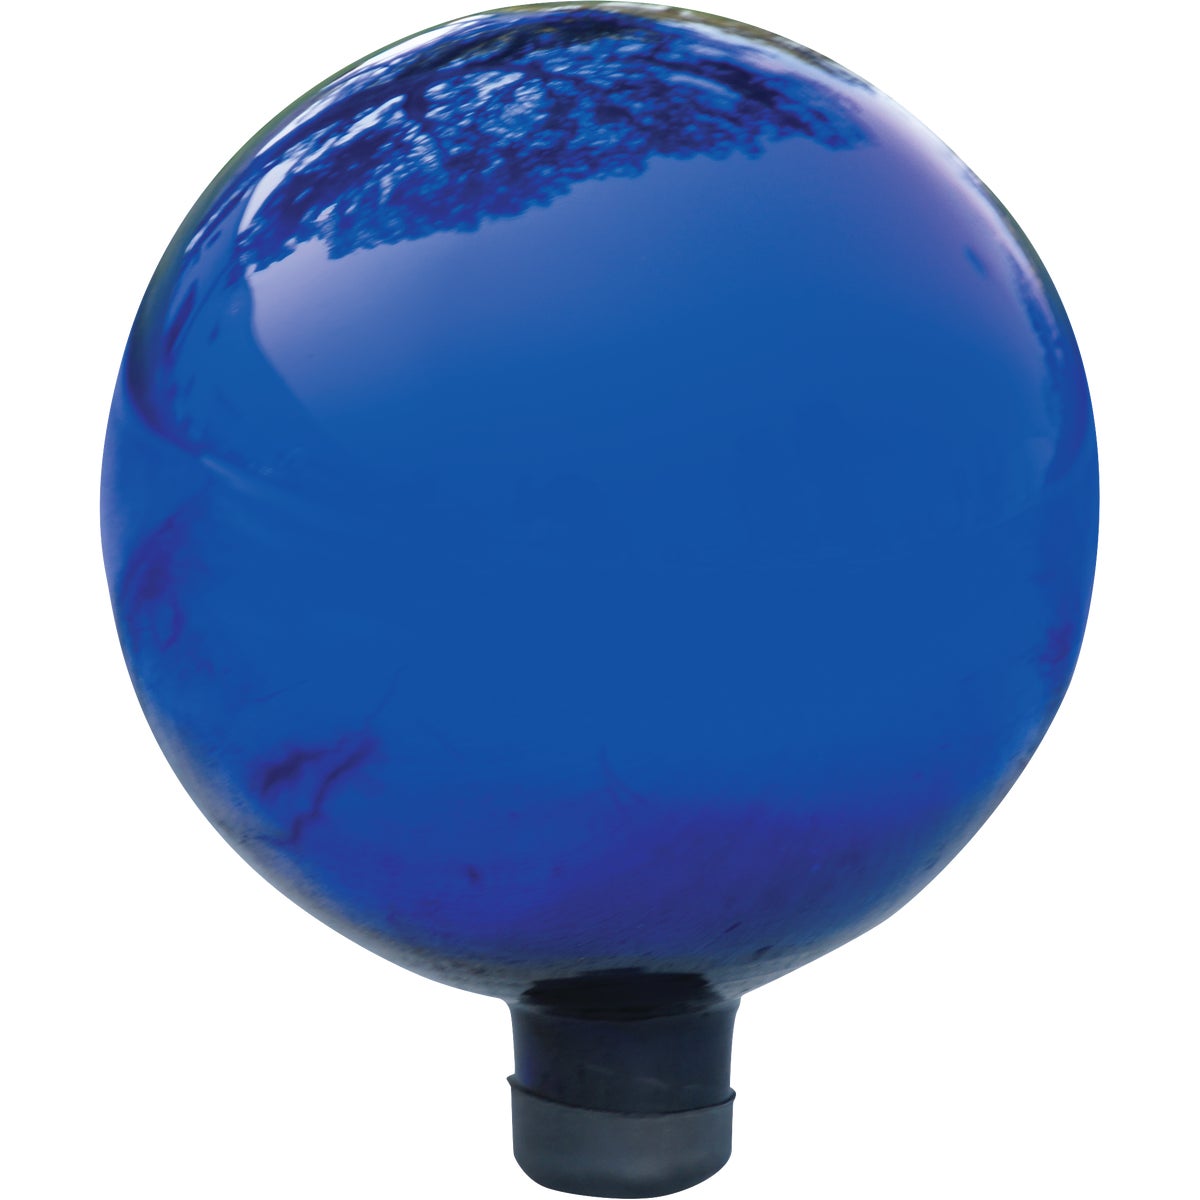 Item 705800, Glass gazing globe lawn ornament featuring a bright, electric color.